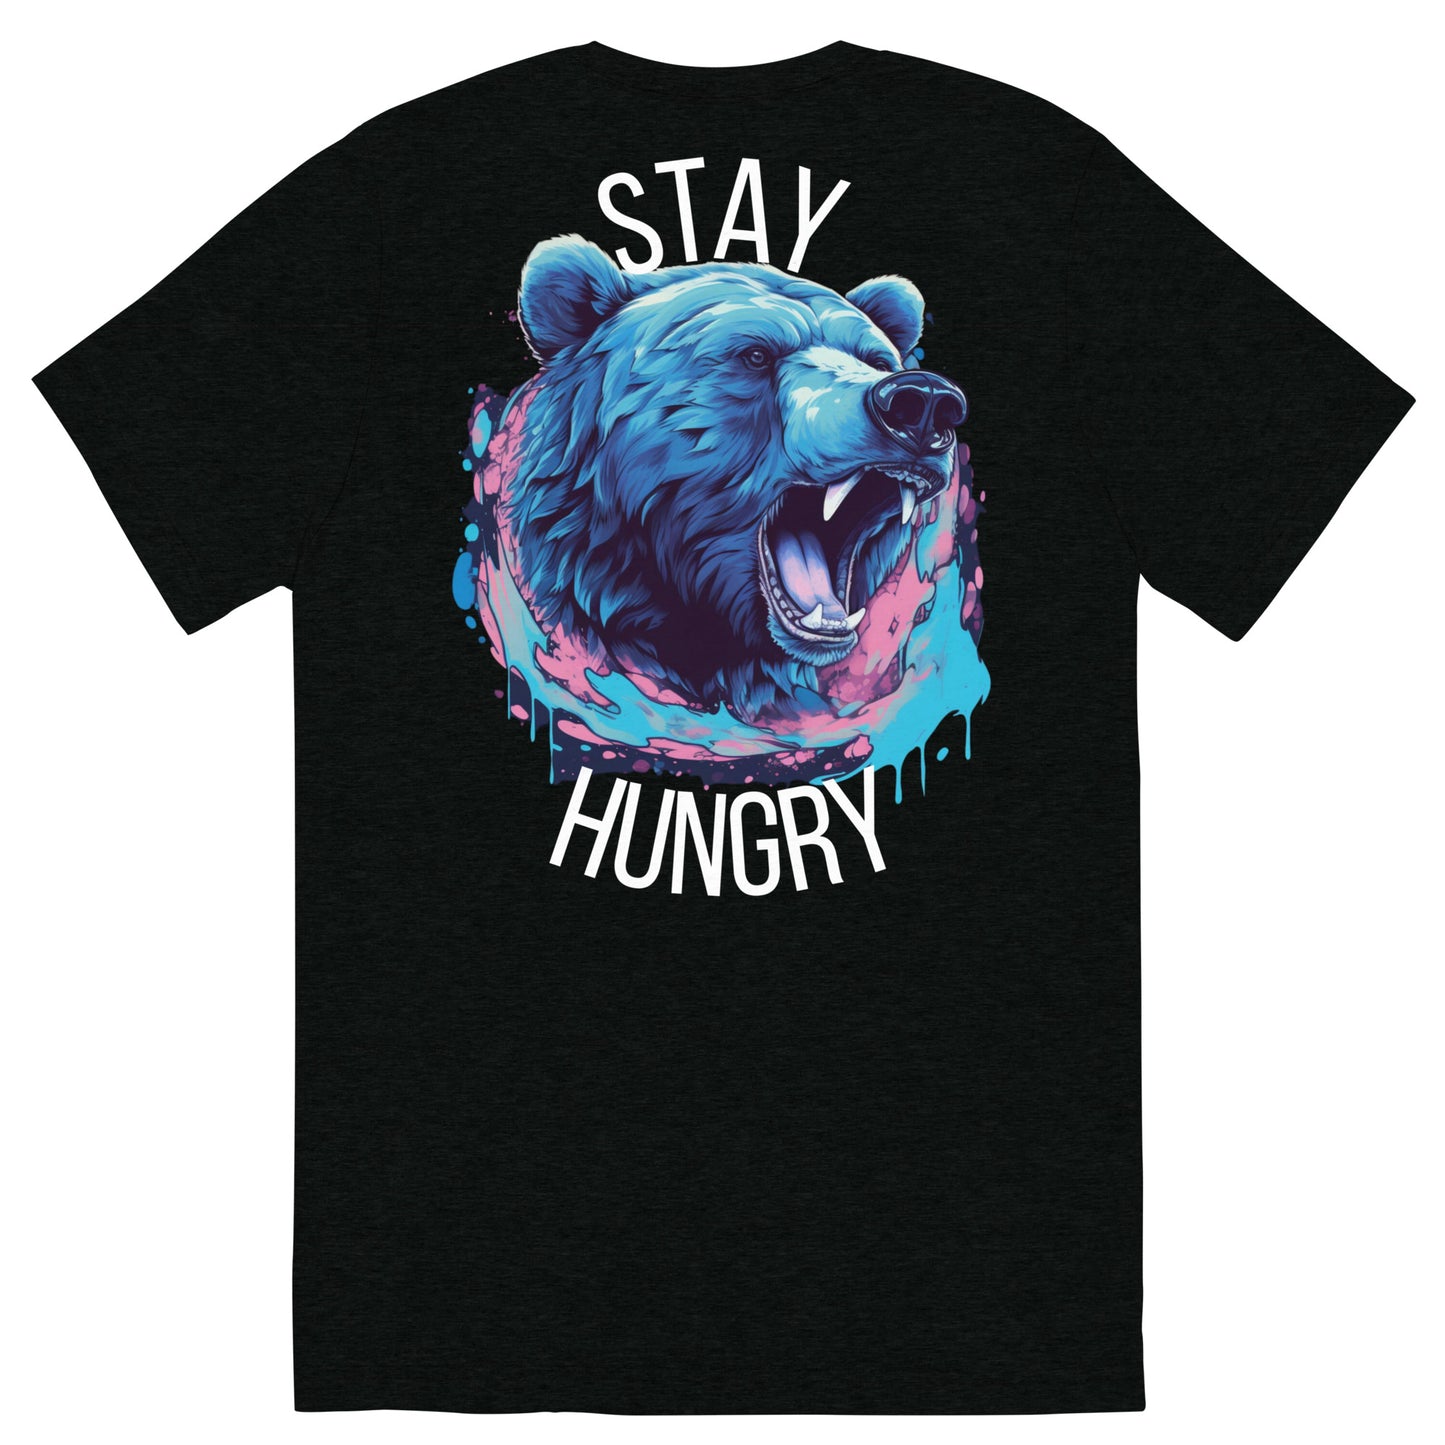 Stay Hungry!